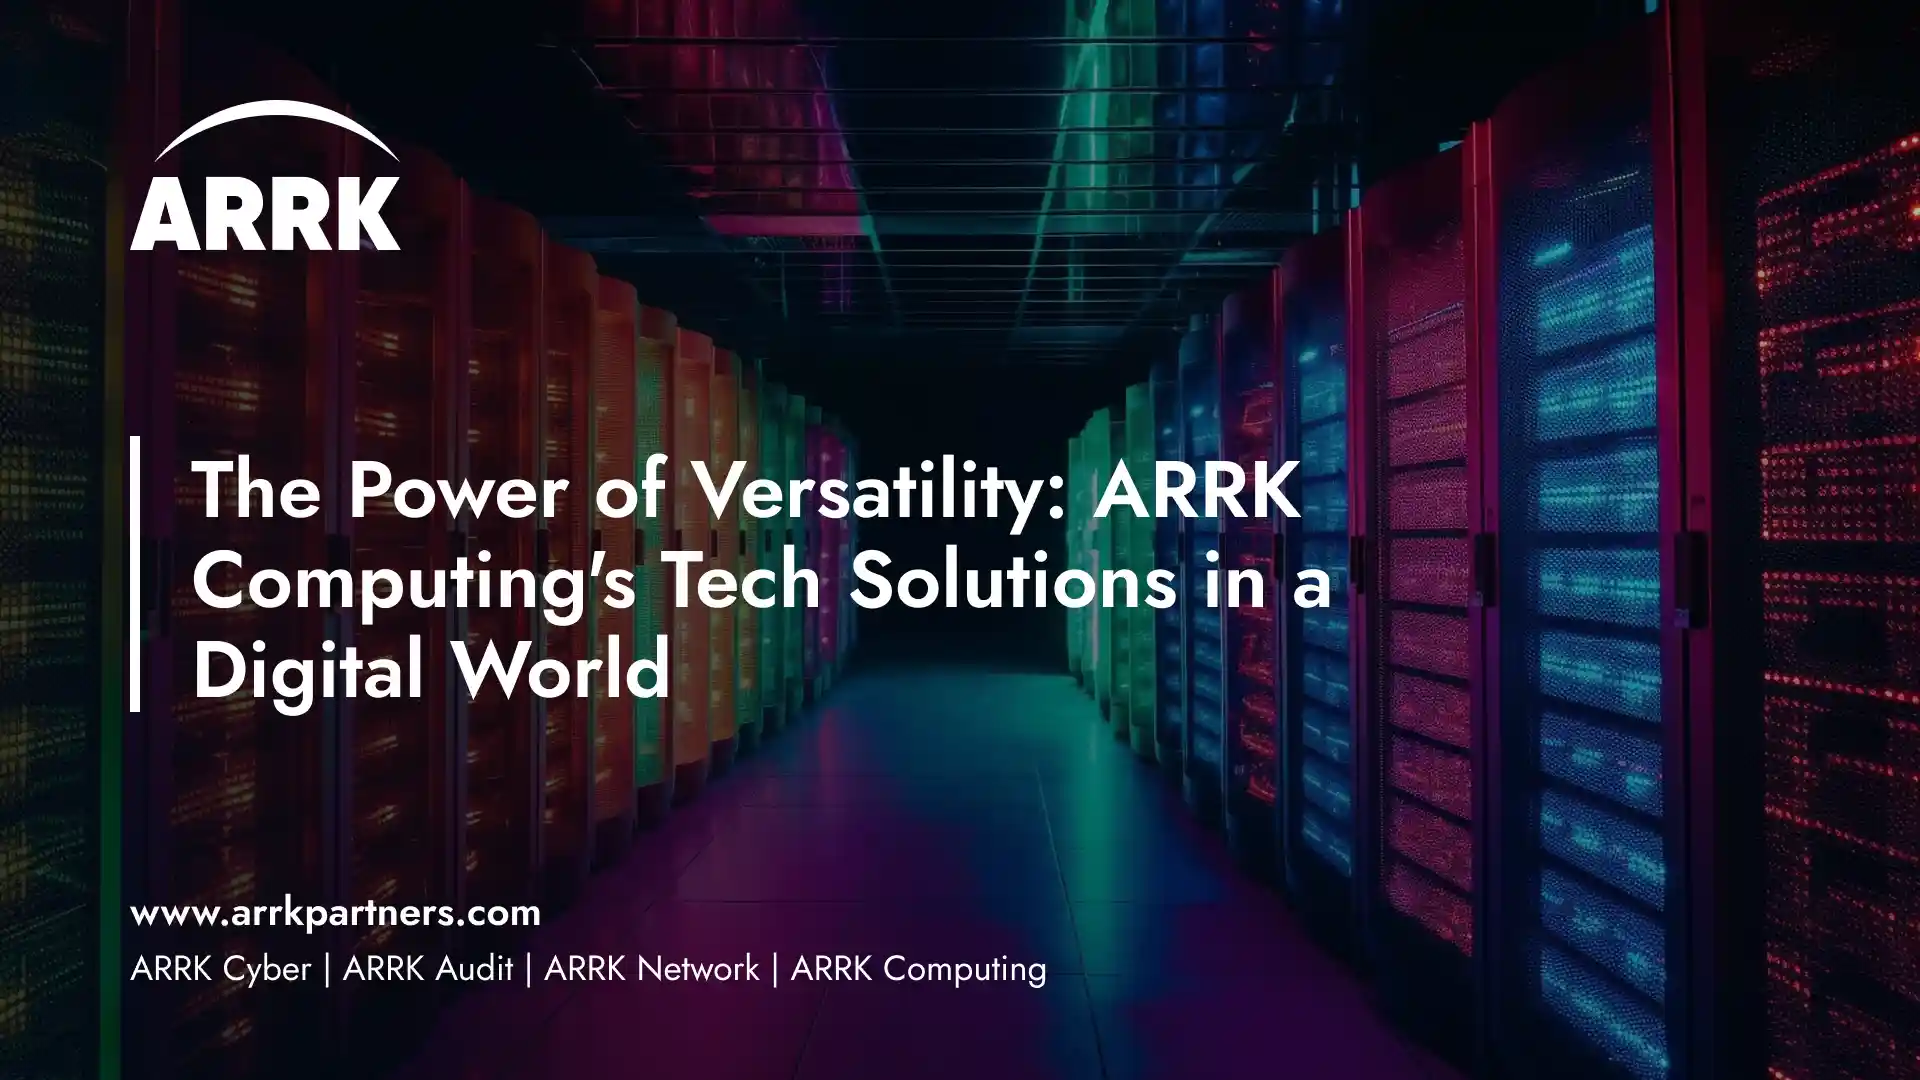 The Power of Versatility: ARRK Computing's Tech Solutions in a Digital World